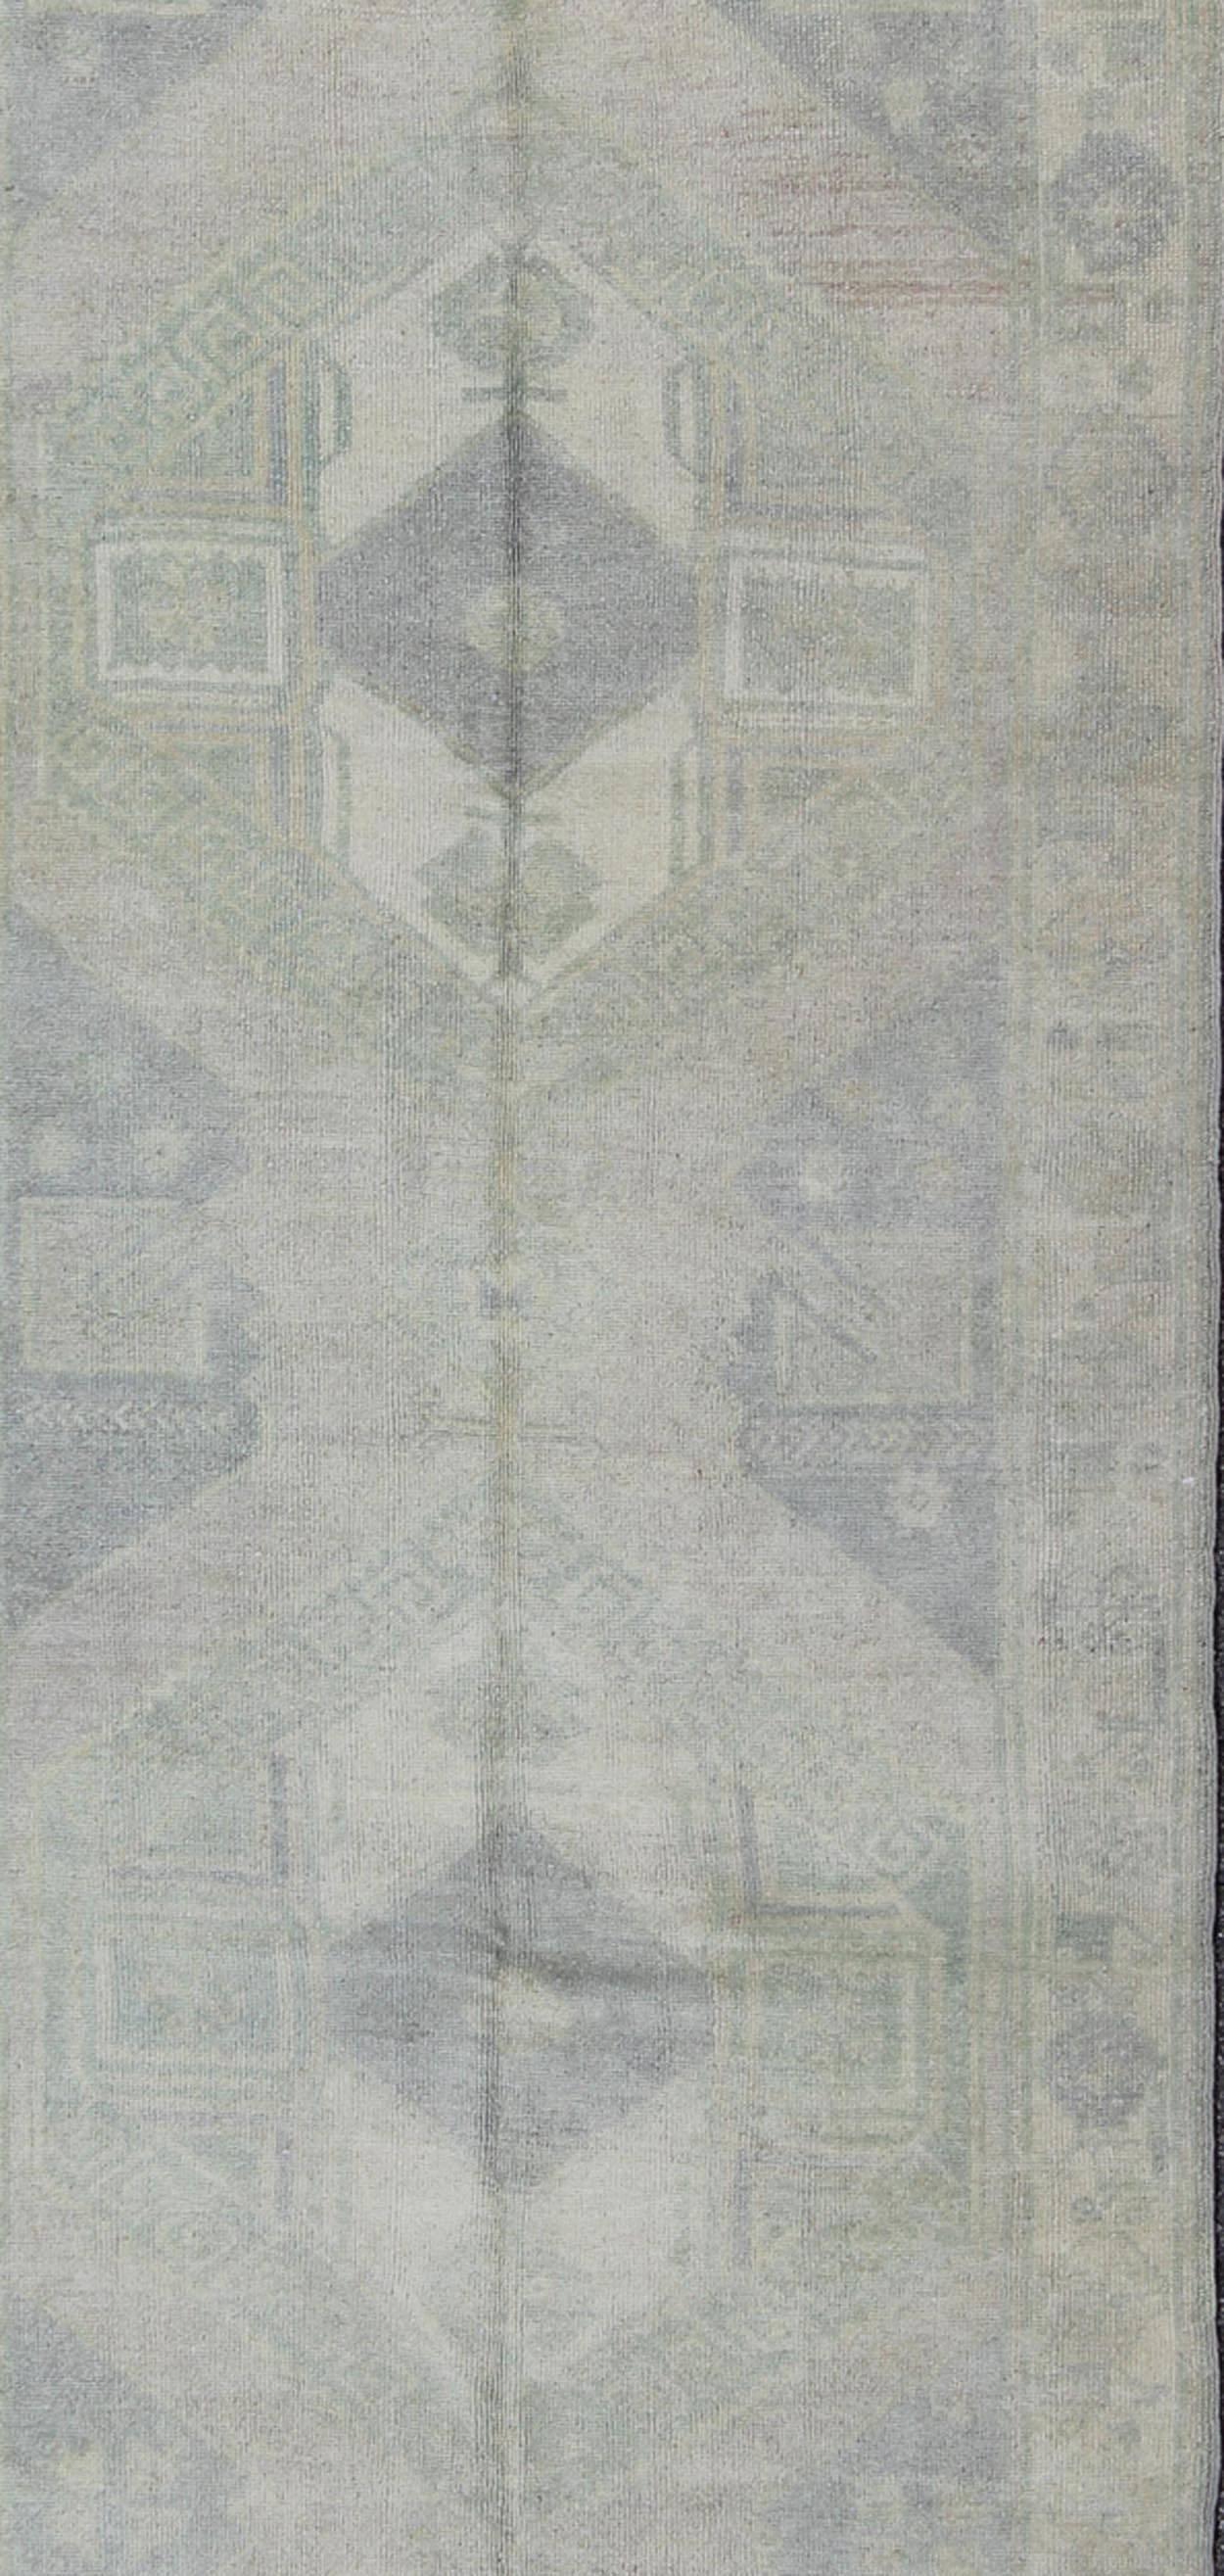 Muted Turkish Oushak Carpet with Two Diamond Medallions in Blue and Gray In Good Condition For Sale In Atlanta, GA